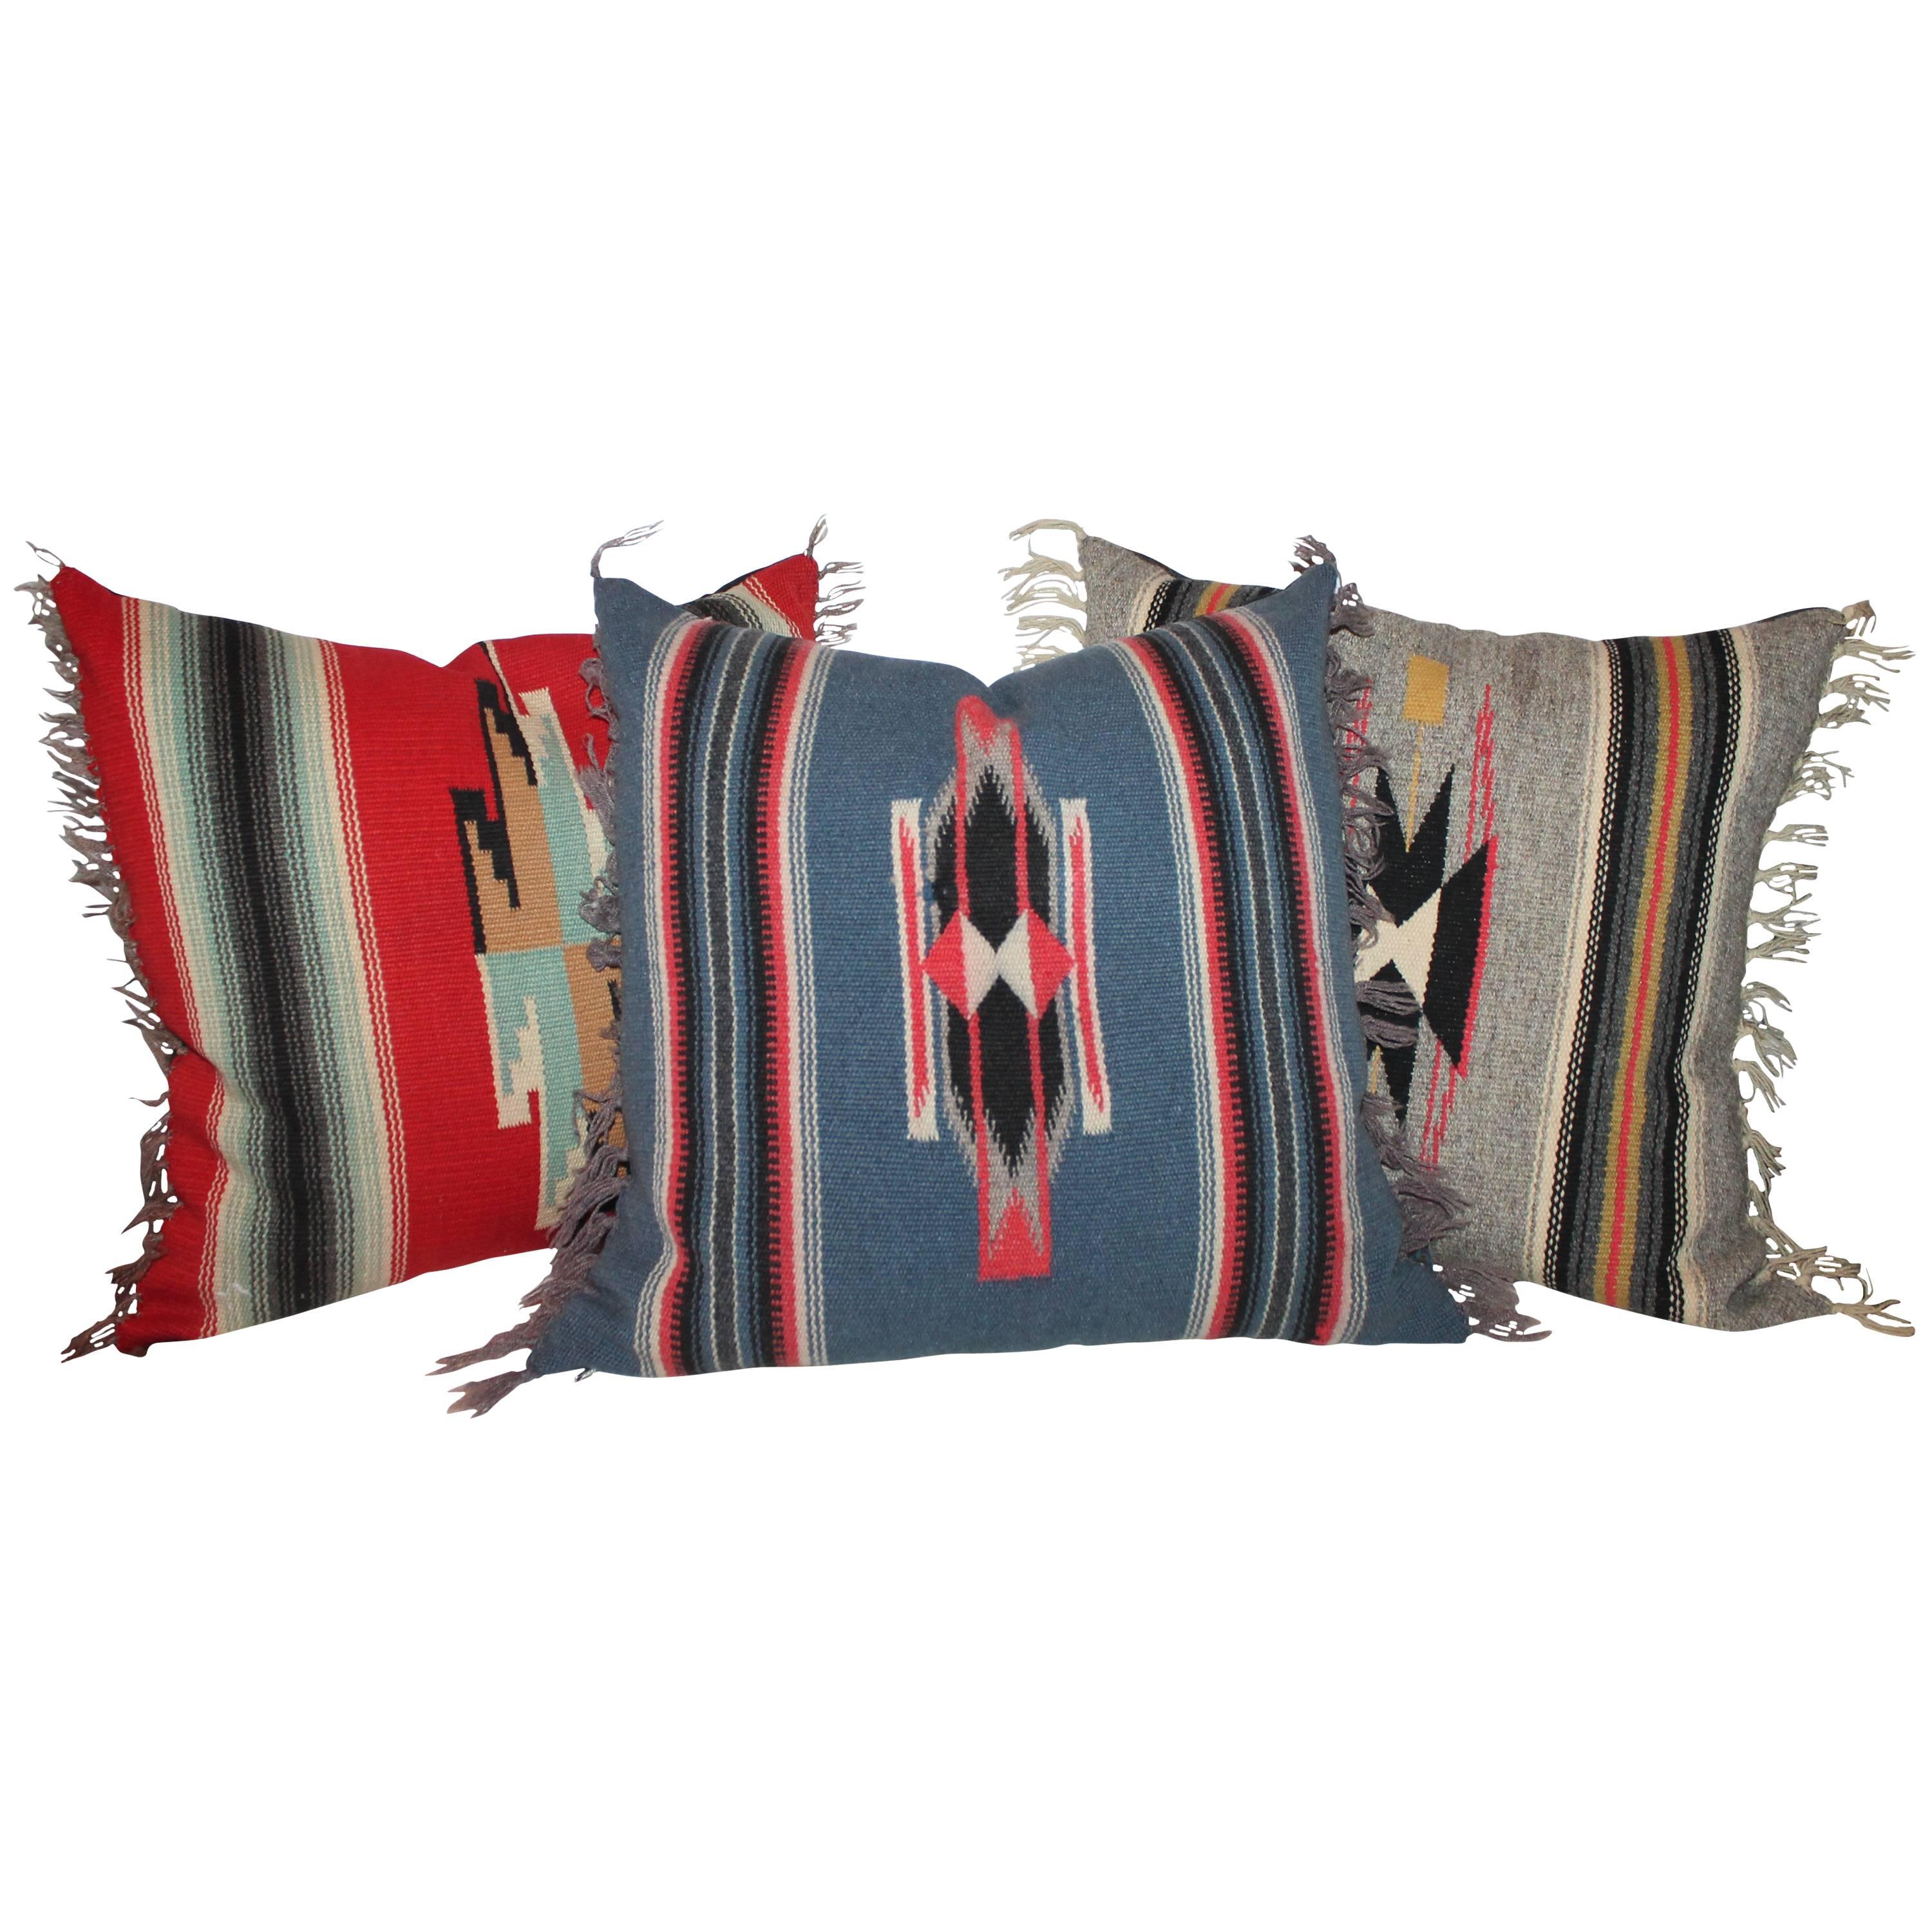 Amazing Mexican or American Indian Serape Square Pillows